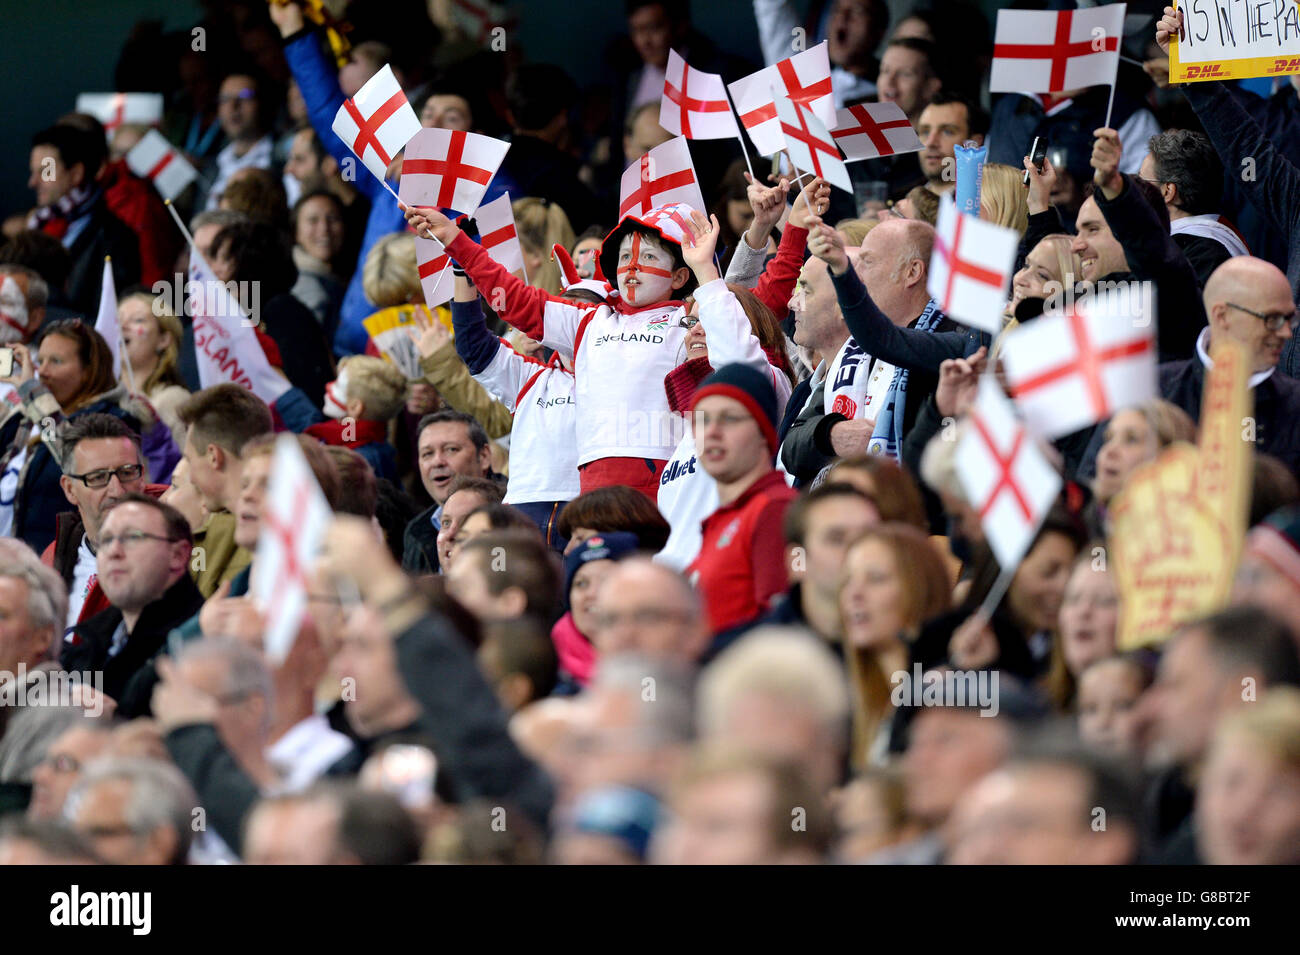 England fans waving flags in the stands during the Rugby World Cup match at the City of Manchester Stadium. Stock Photo